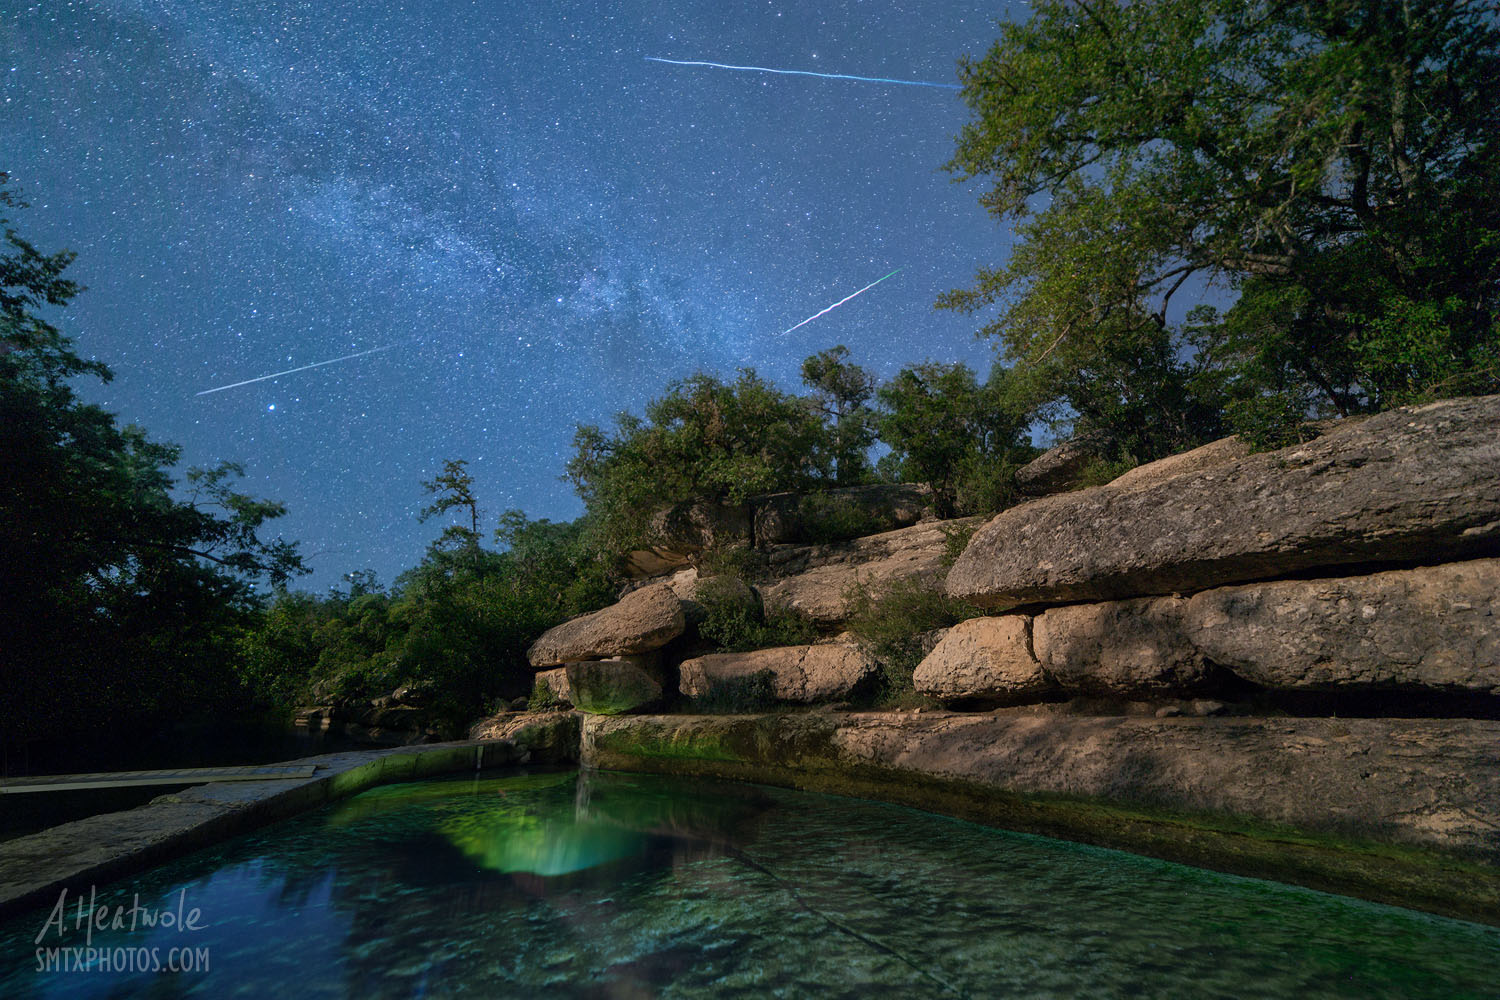 Jacob's Well in Wimberley, TX at night with shooting stars.